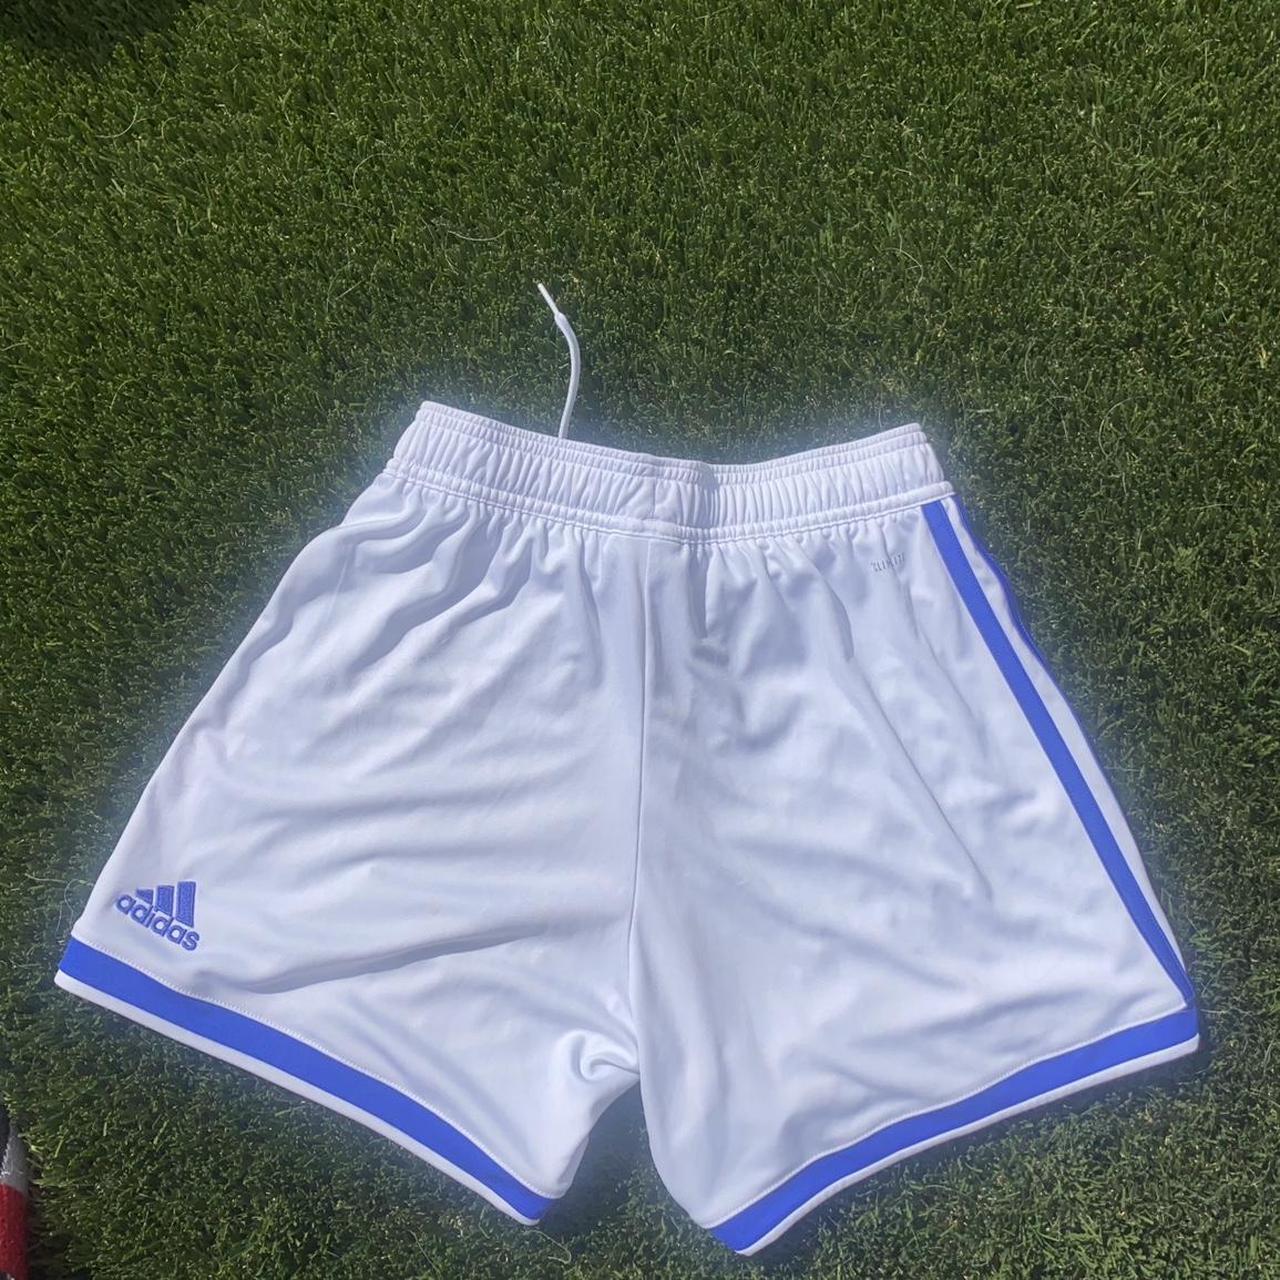 Adidas Women's White and Blue Shorts (3)